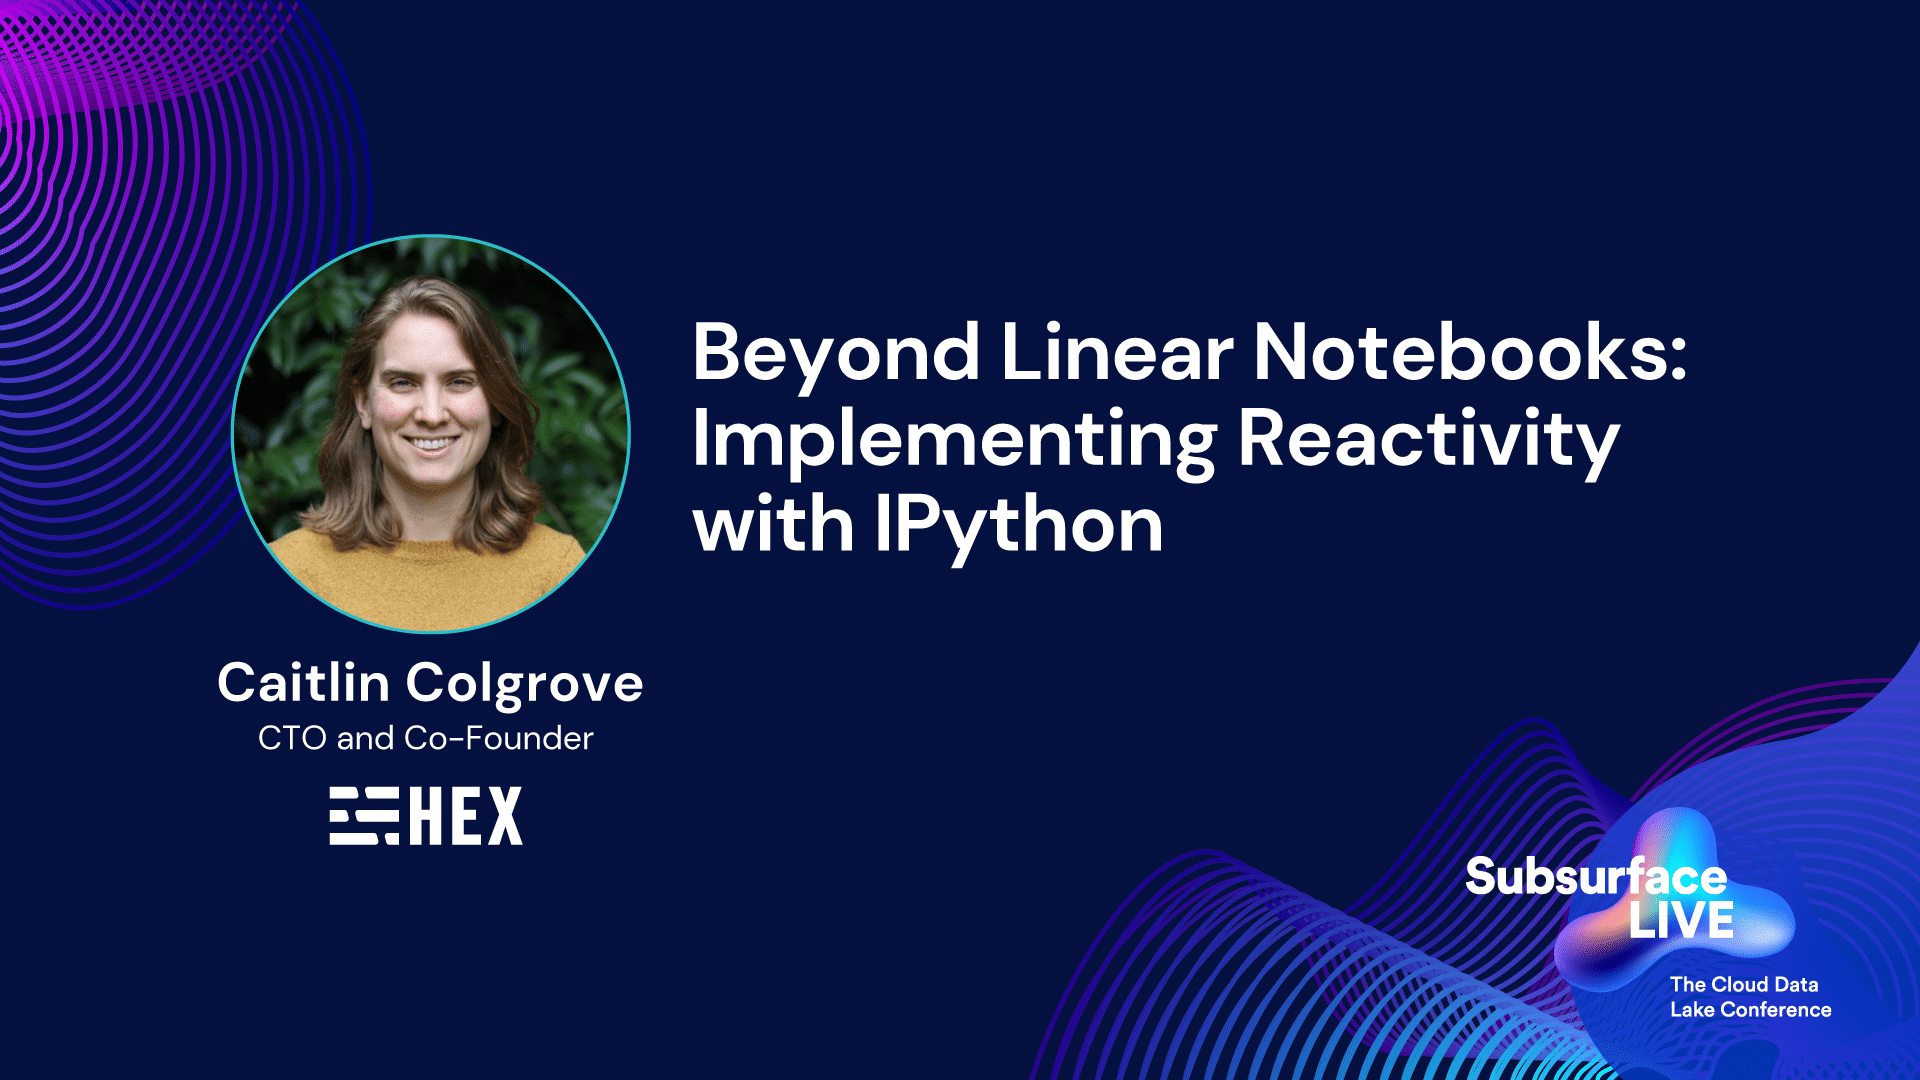 Beyond Linear Notebooks: Implementing Reactivity with IPython